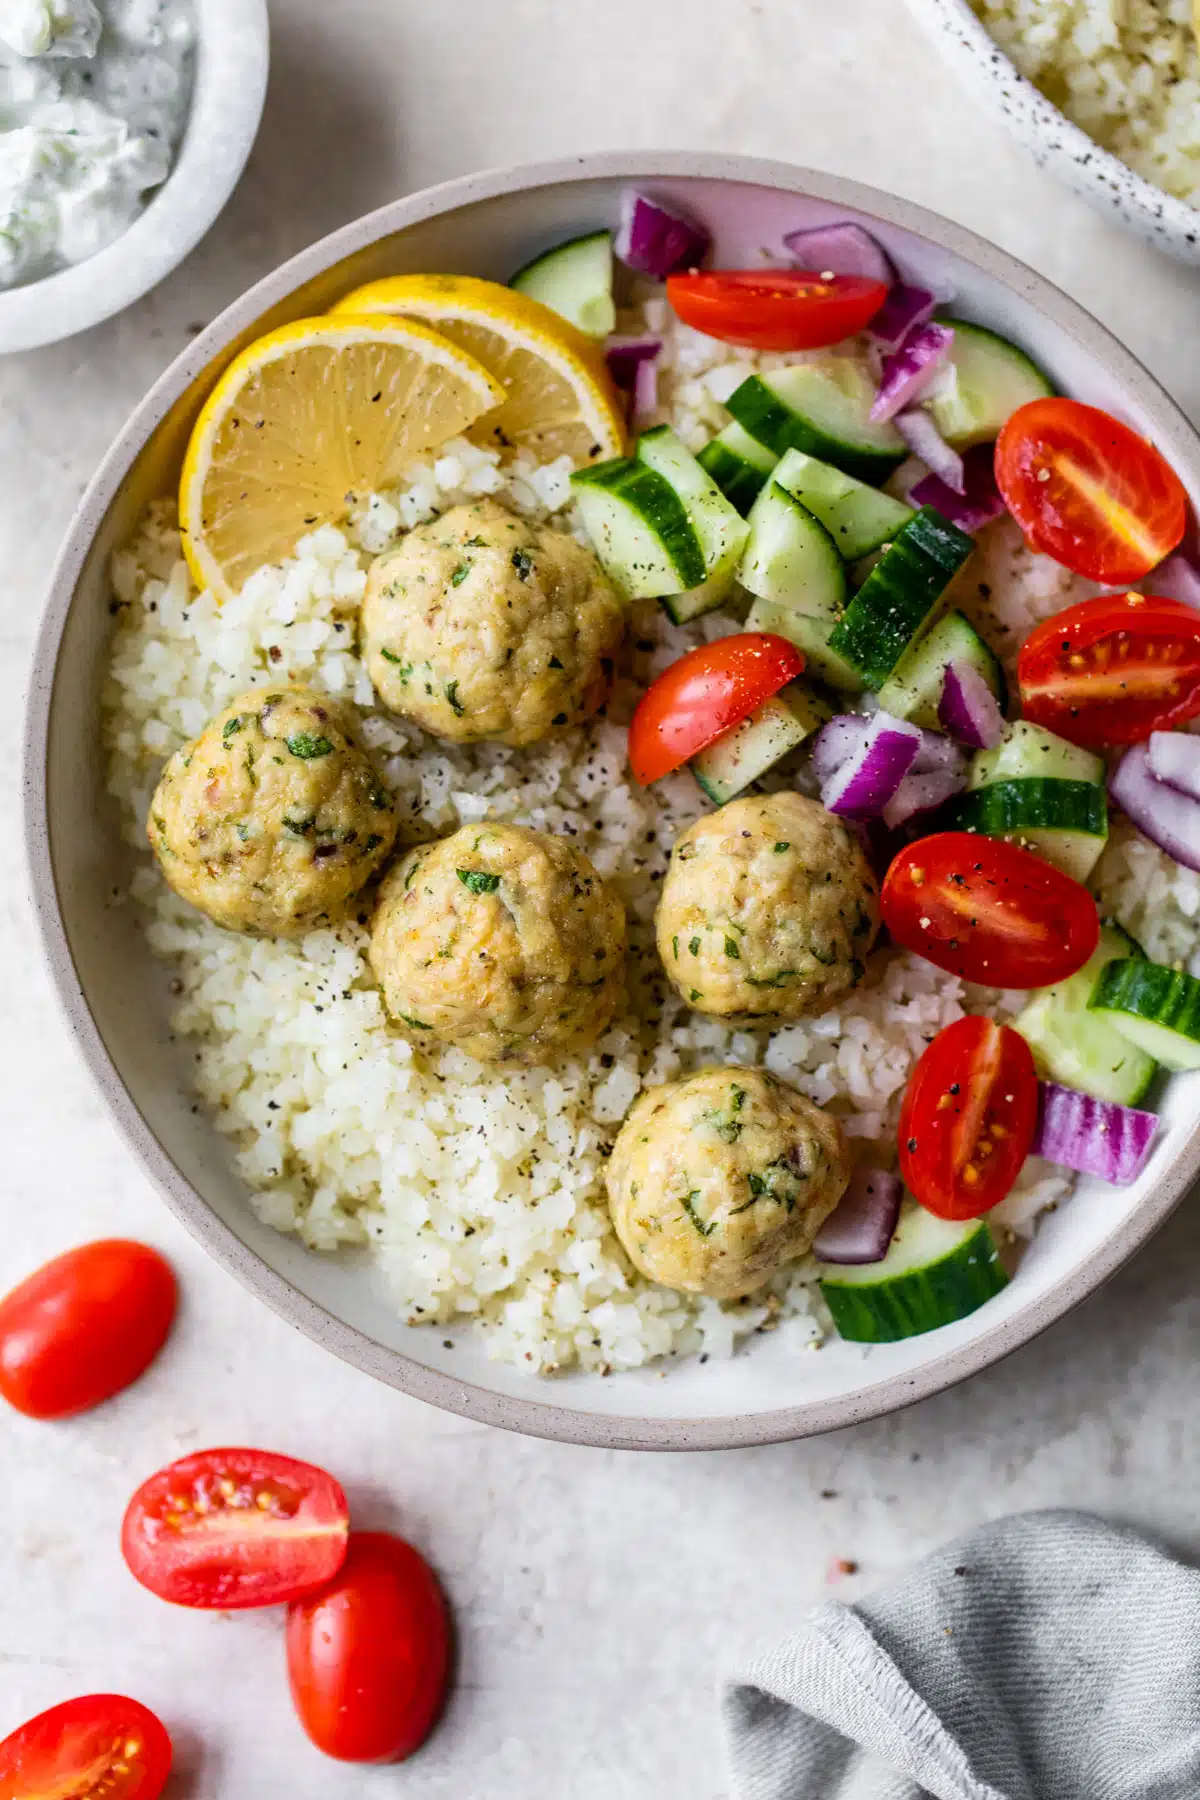 cauliflower rice topped with meatballs and vegetables like tomatoes and cucumber in a bowl